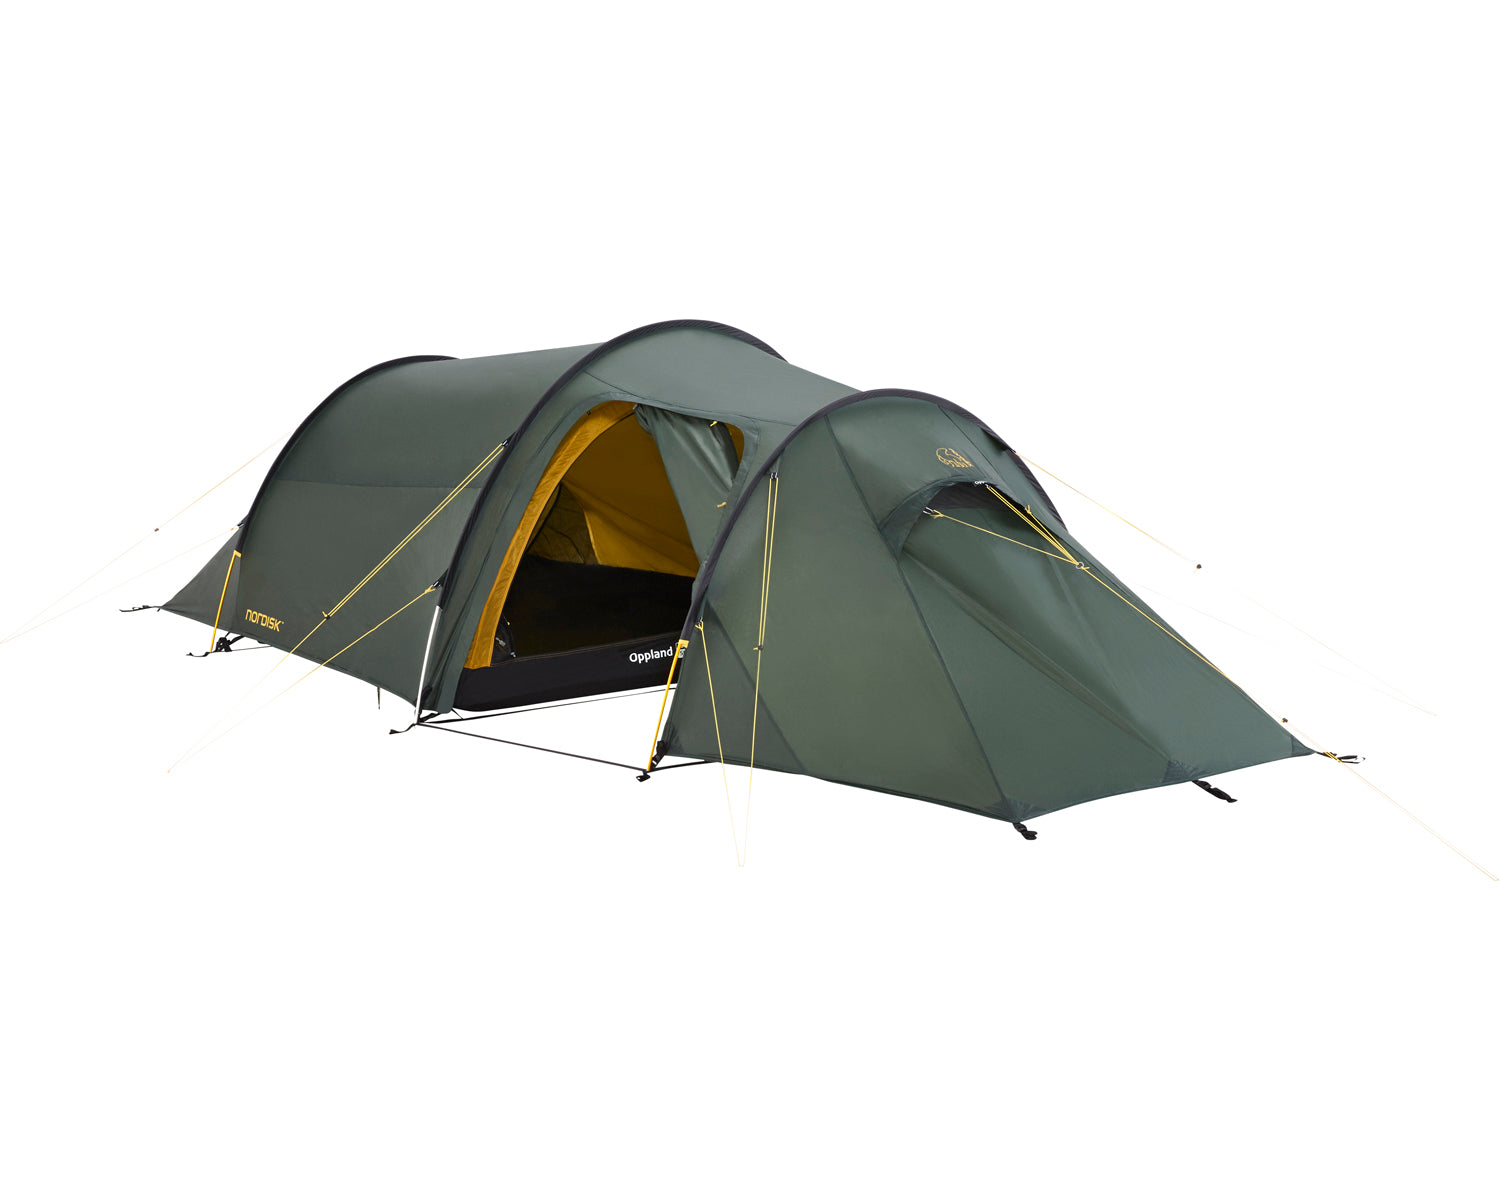 Oppland 2 SI tent - 2 person - Forest Green